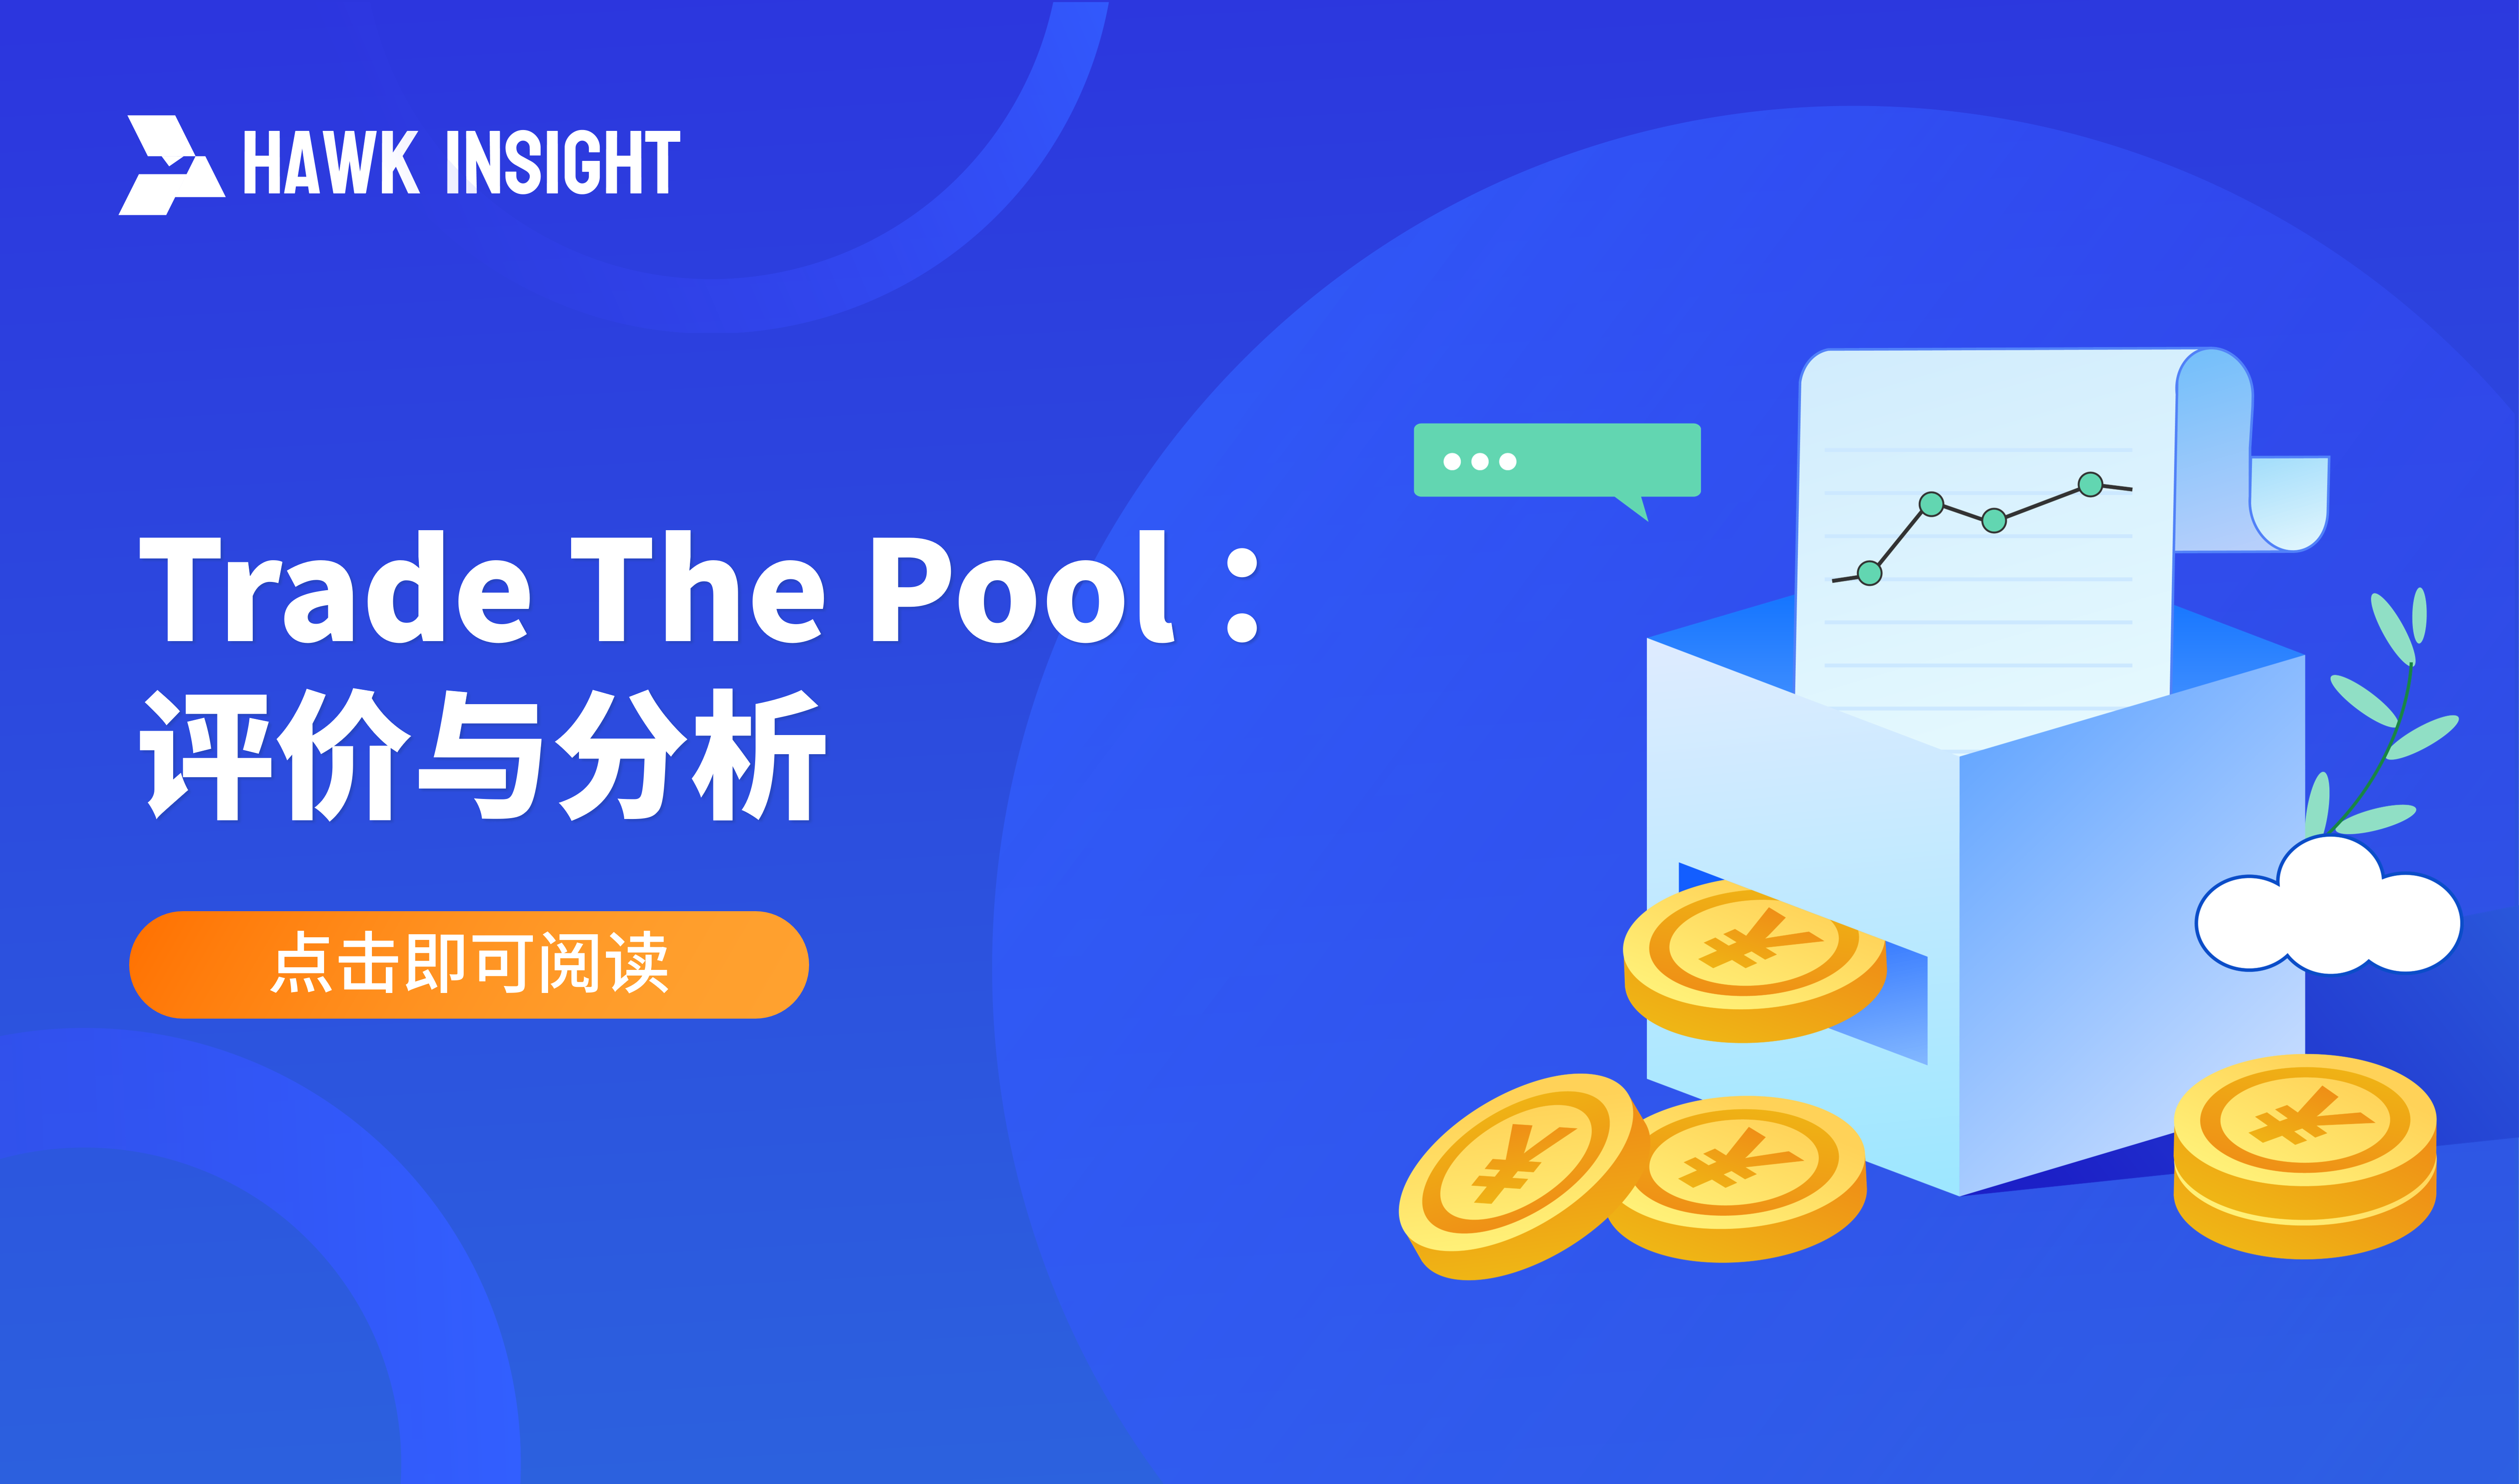 Trade The Pool：评价与分析